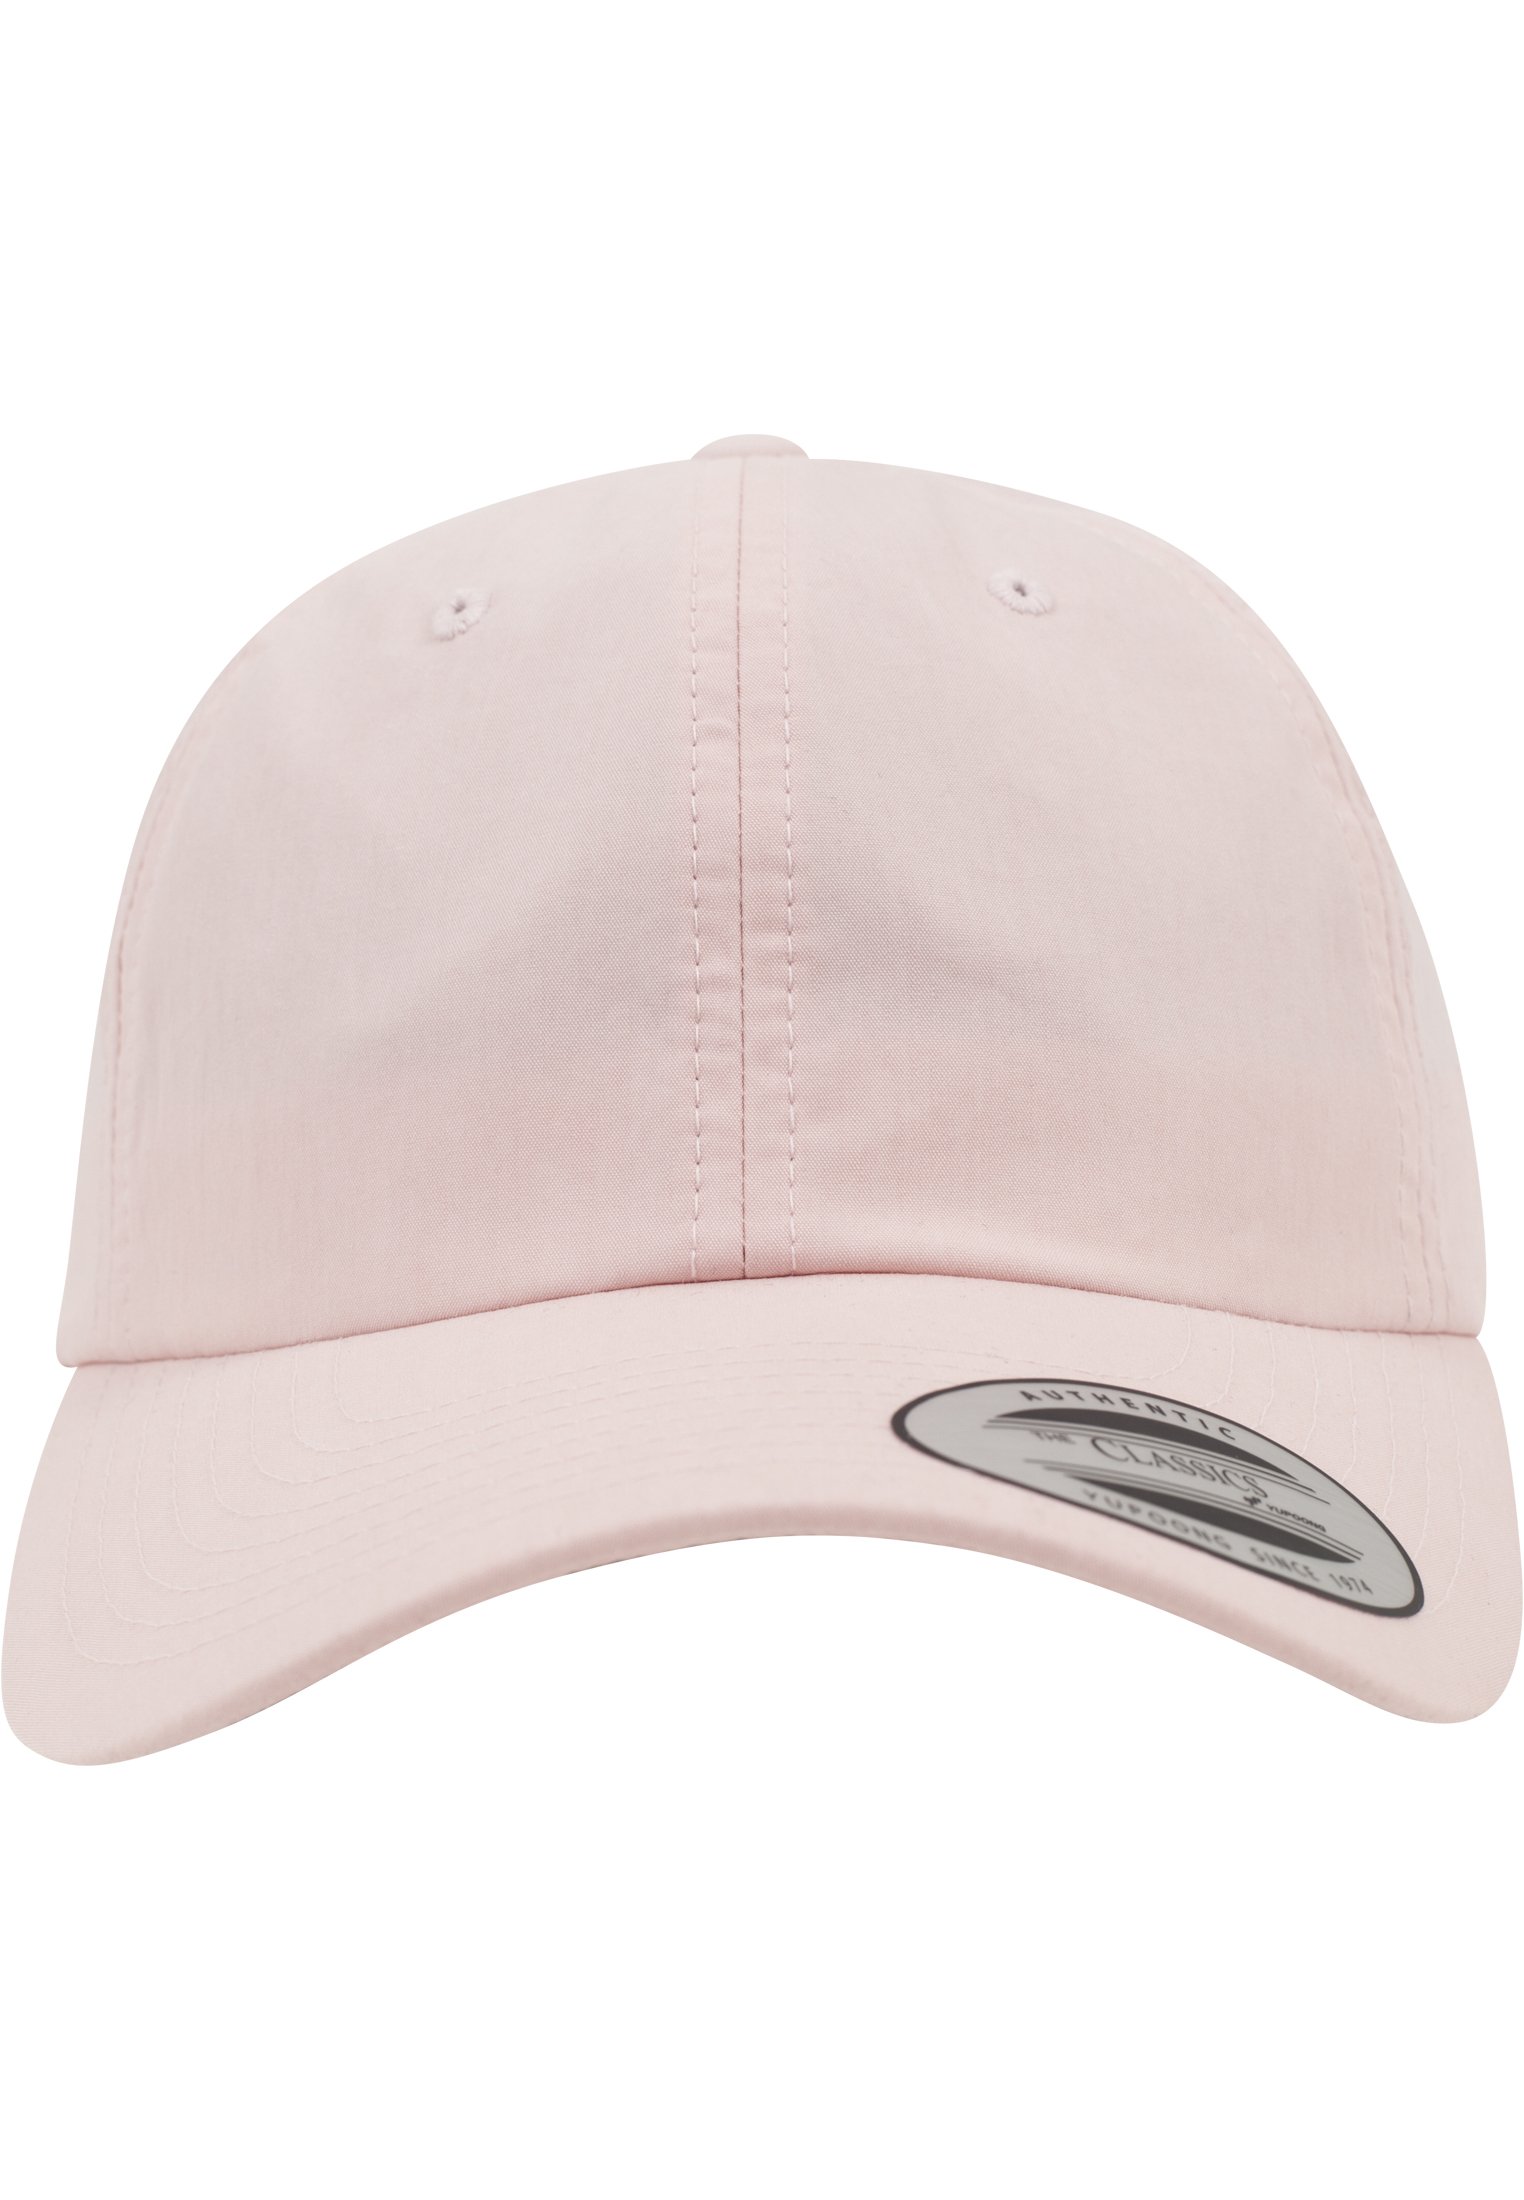 Low Profile Cap-6245W Washed